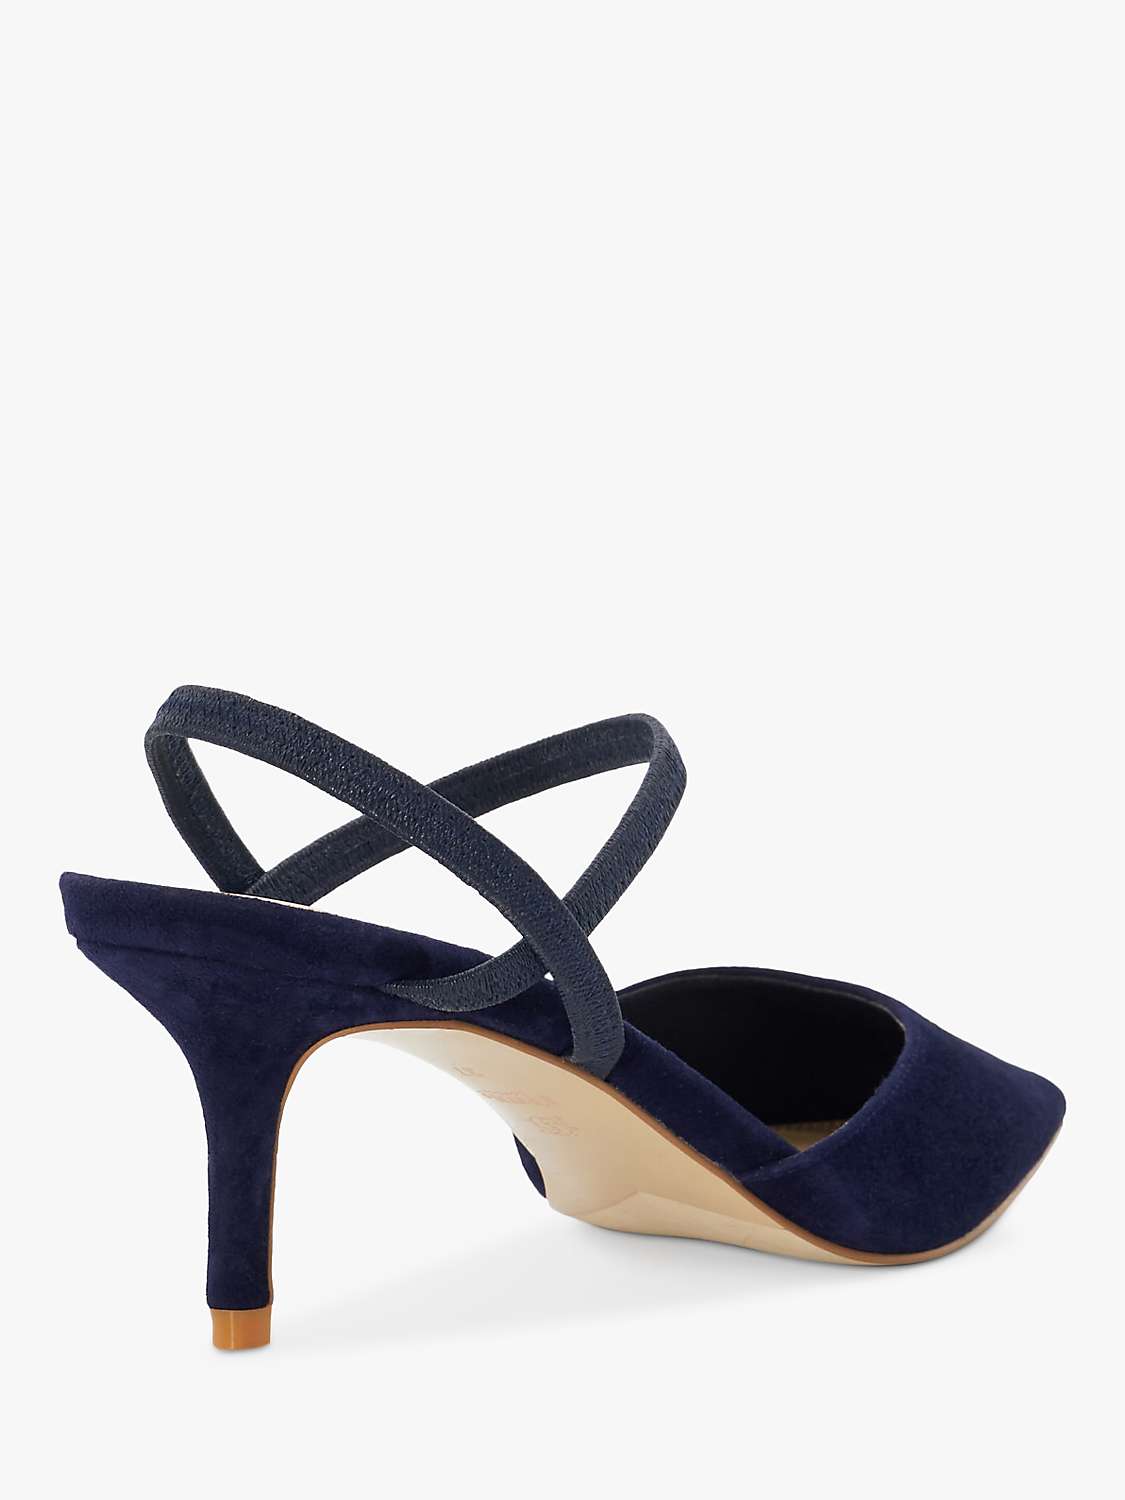 Buy Dune Classical Suede Elasticated Pointed Shoes, Navy Online at johnlewis.com